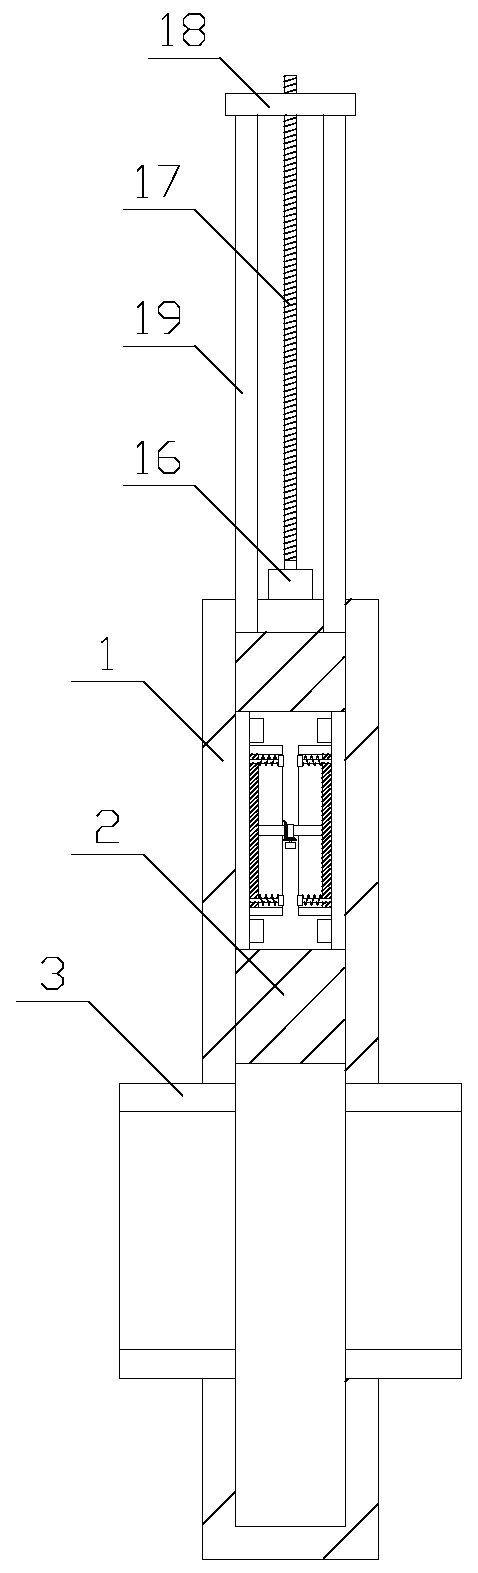 On-off device with anti-freezing function for tap water pipeline transportation